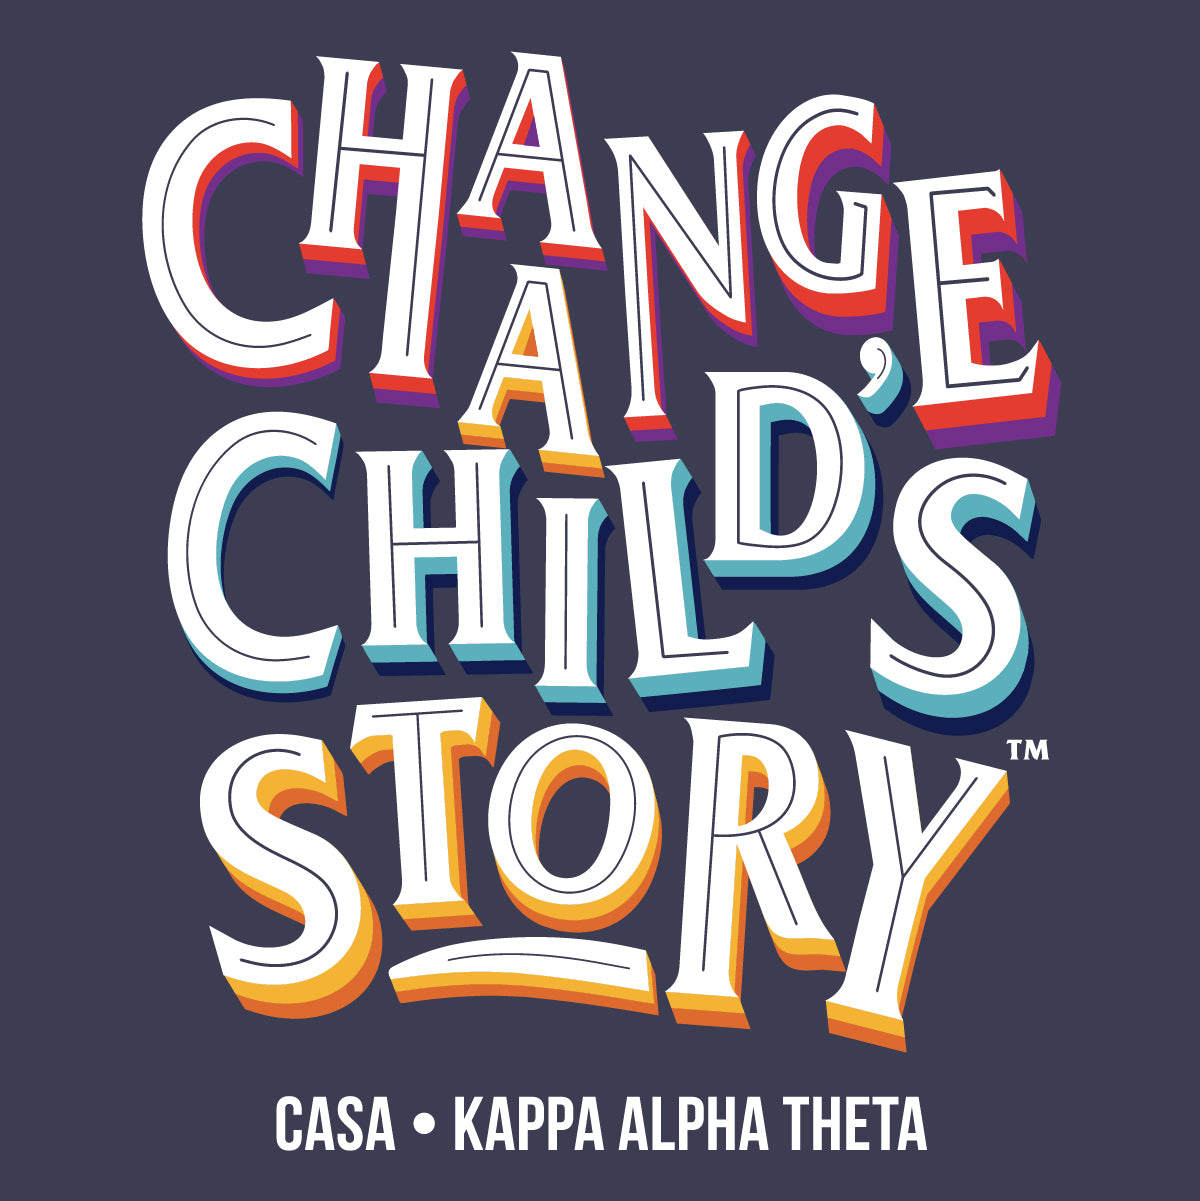 Change a Childs Story